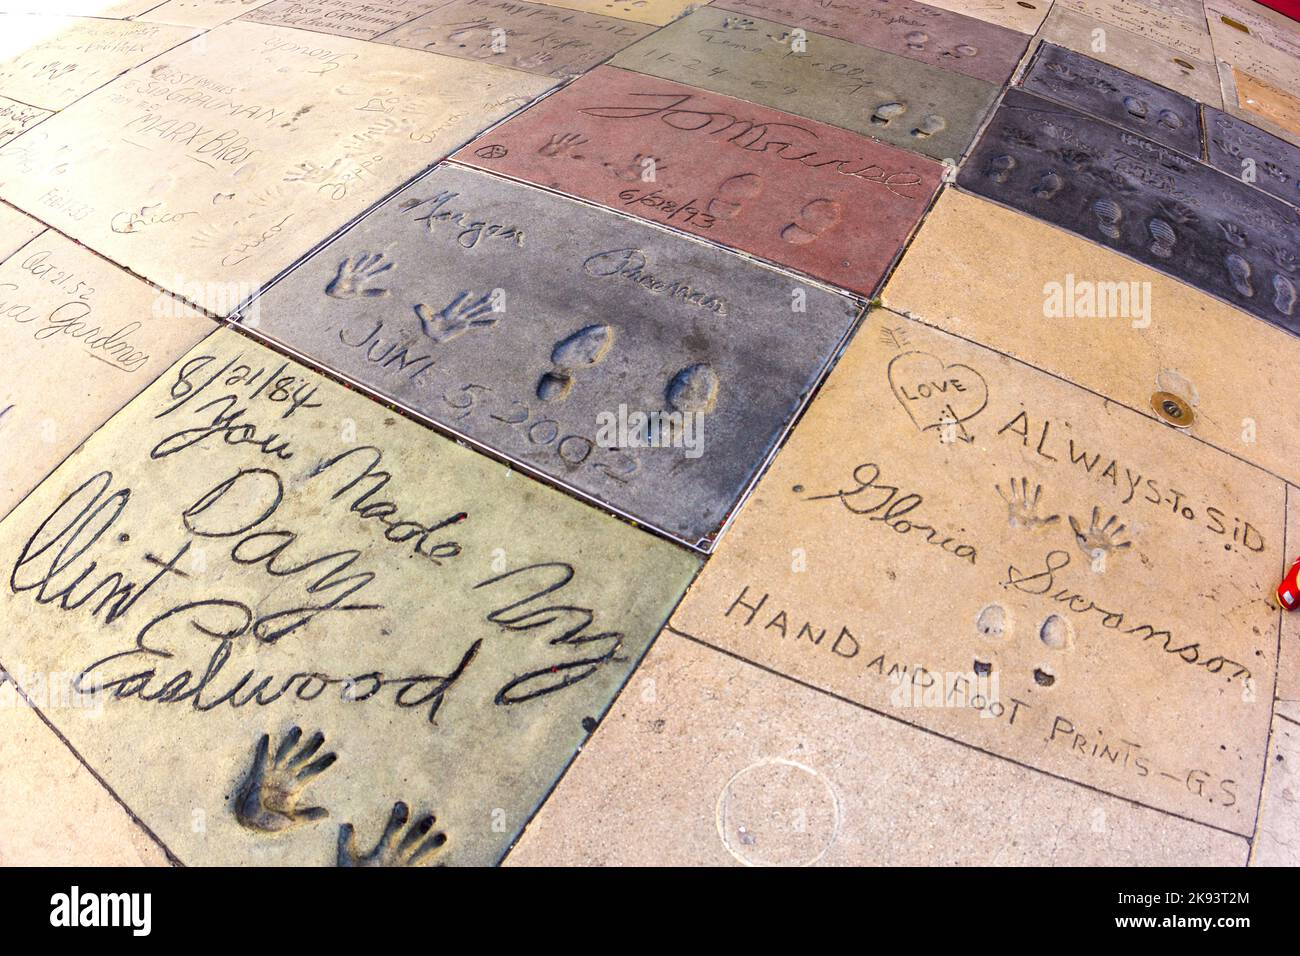 LOS ANGELES - JUNE 26:  handprints of Clint Eastwood  in Hollywood Boulevard on June 26,2012 in Los Angeles. There are nearly 200 celebrity handprints Stock Photo